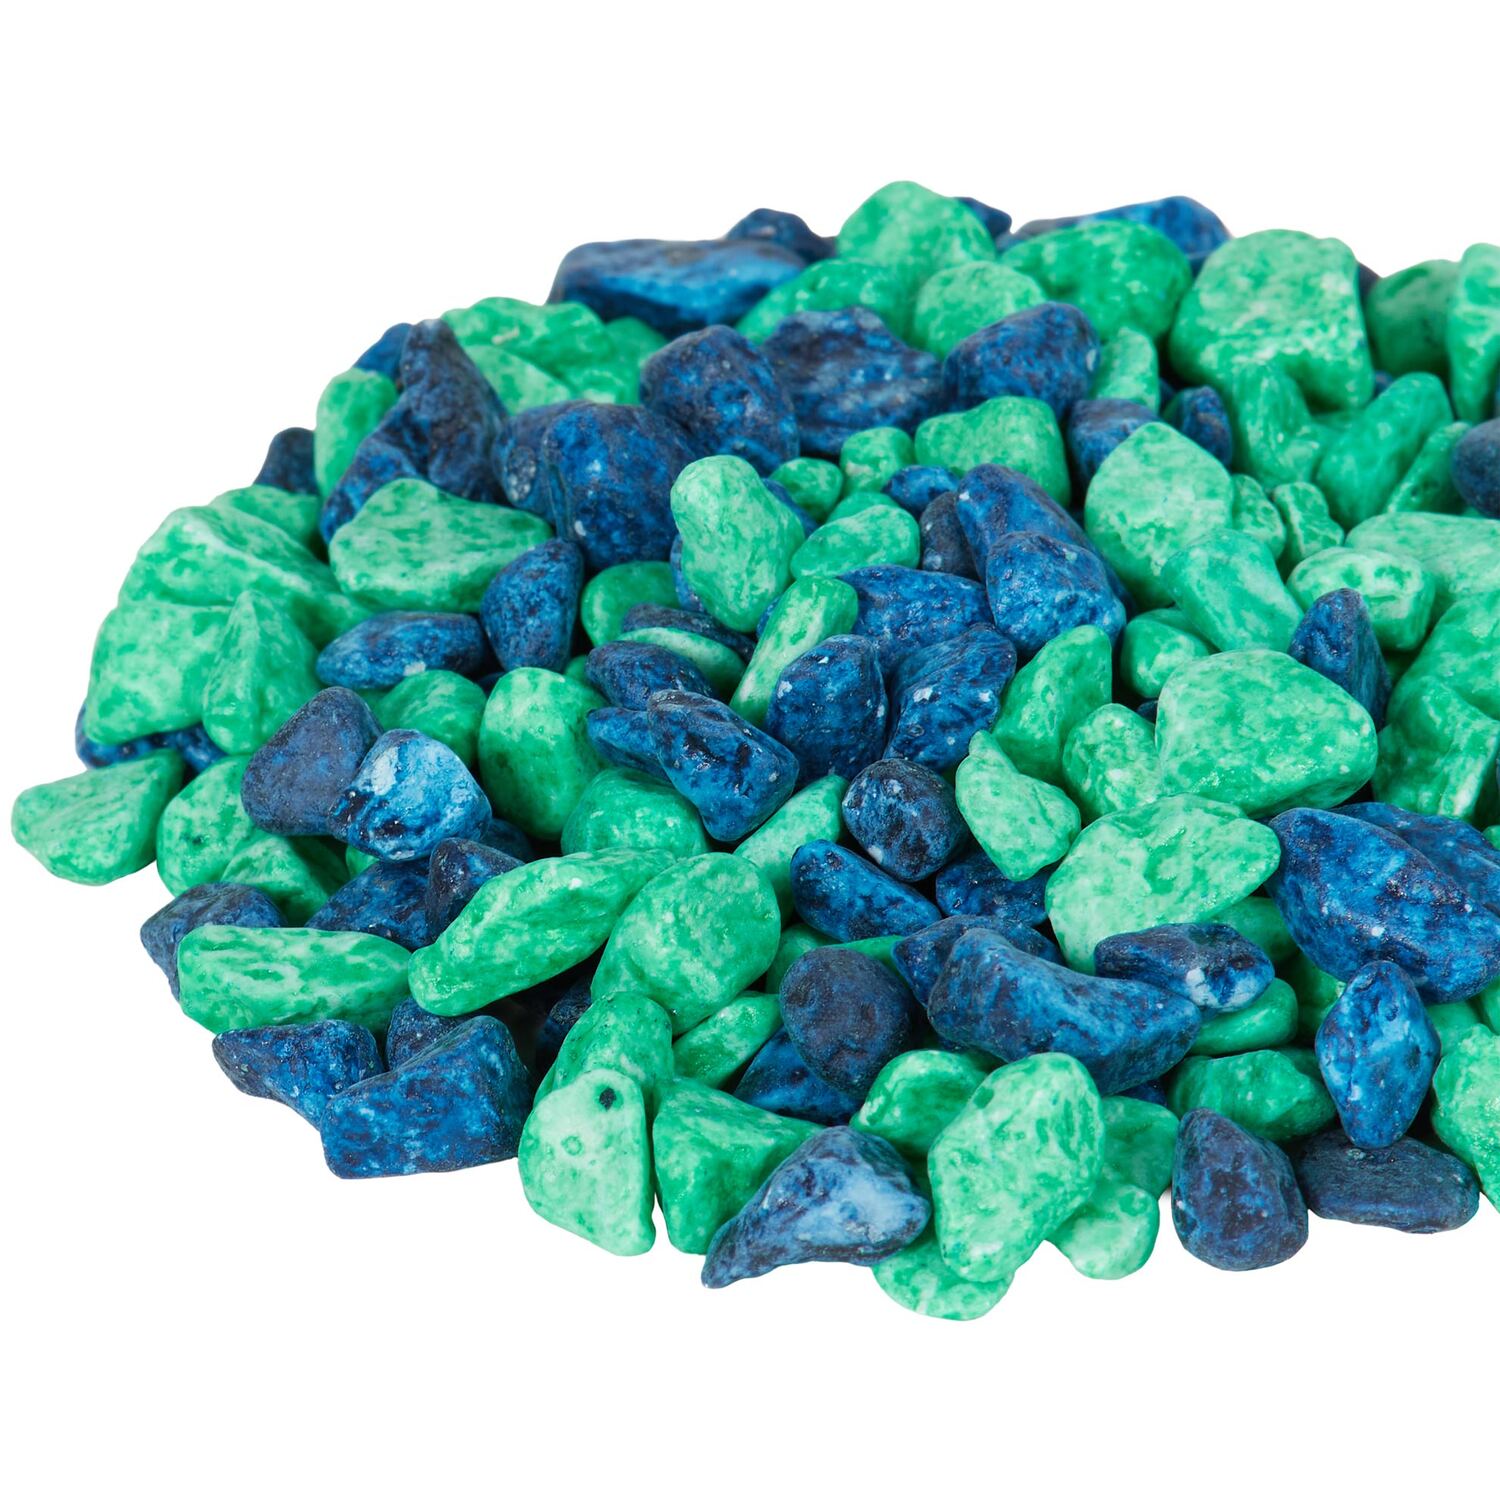 Fish Tank Gravel - Blue and Green Image 3